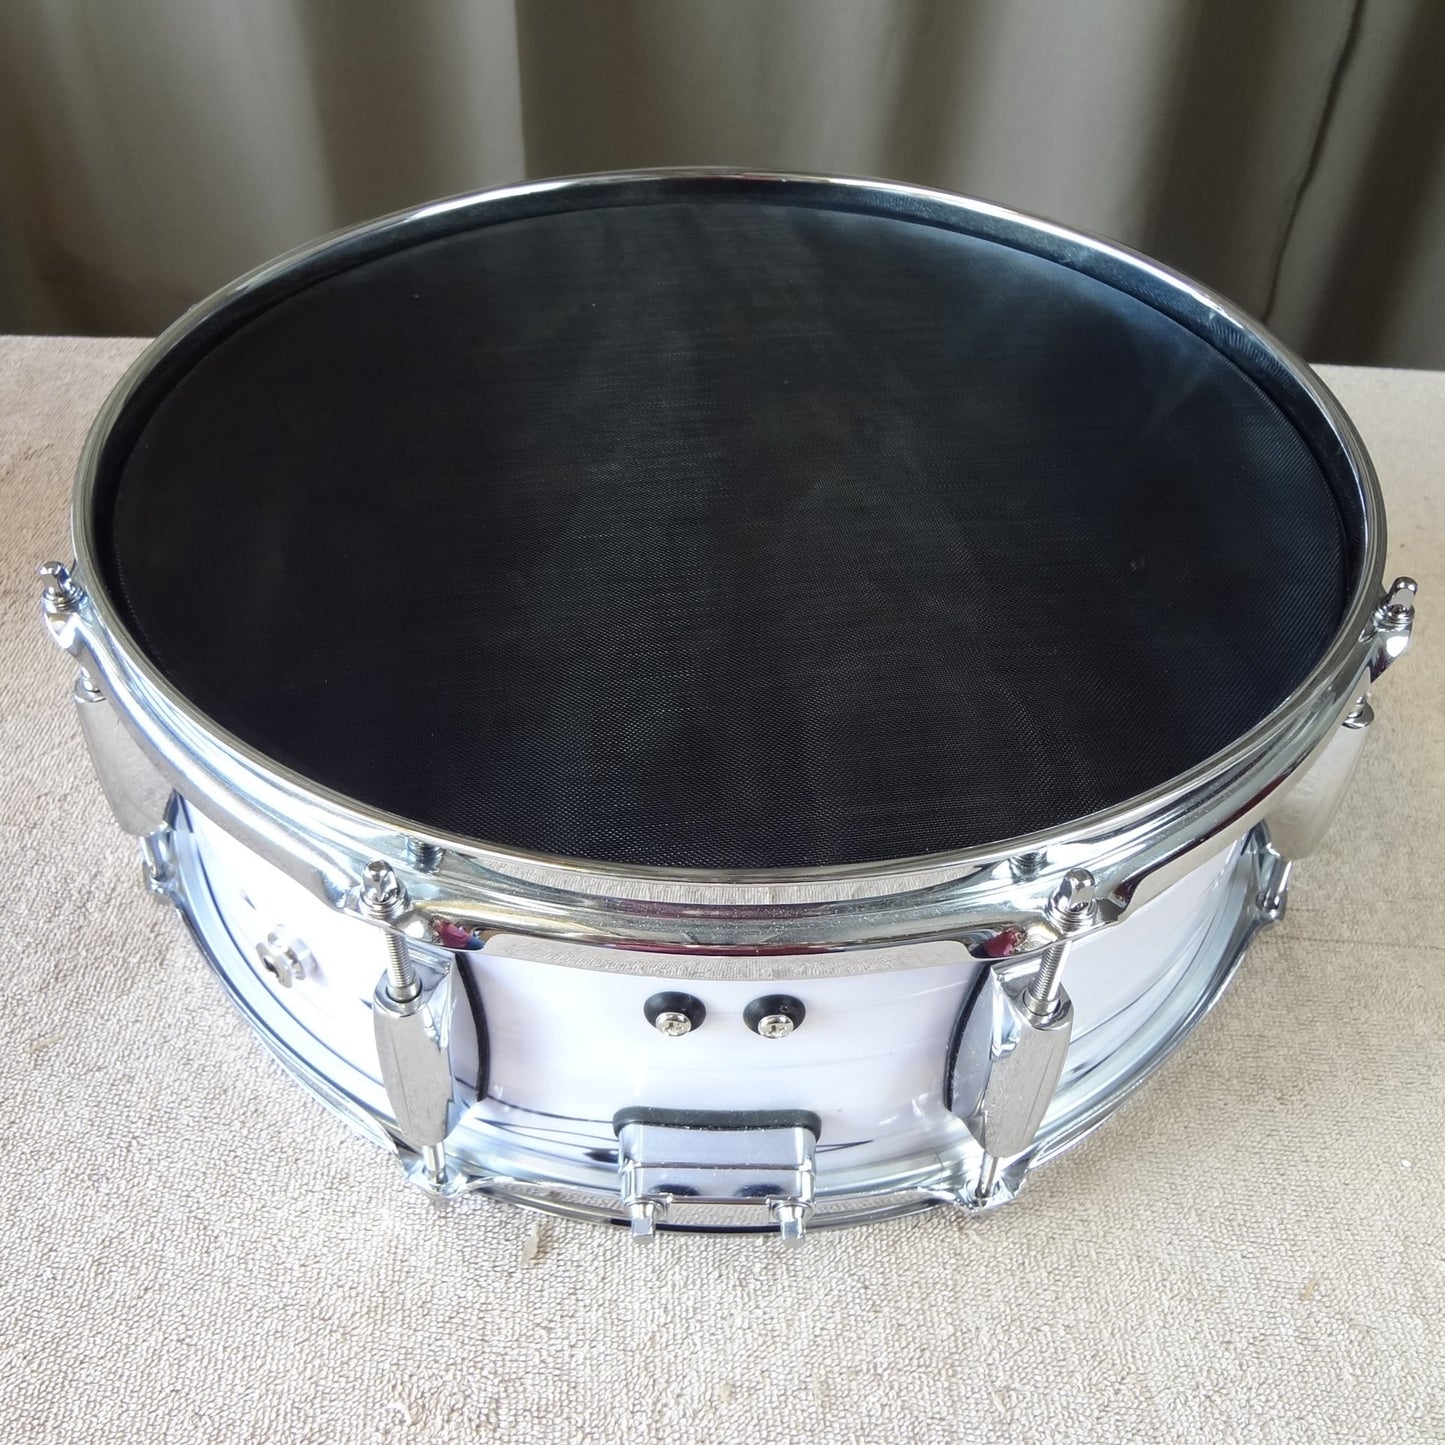 New 14 Inch Hybrid Electronic Acoustic Snare Drum - Black/White